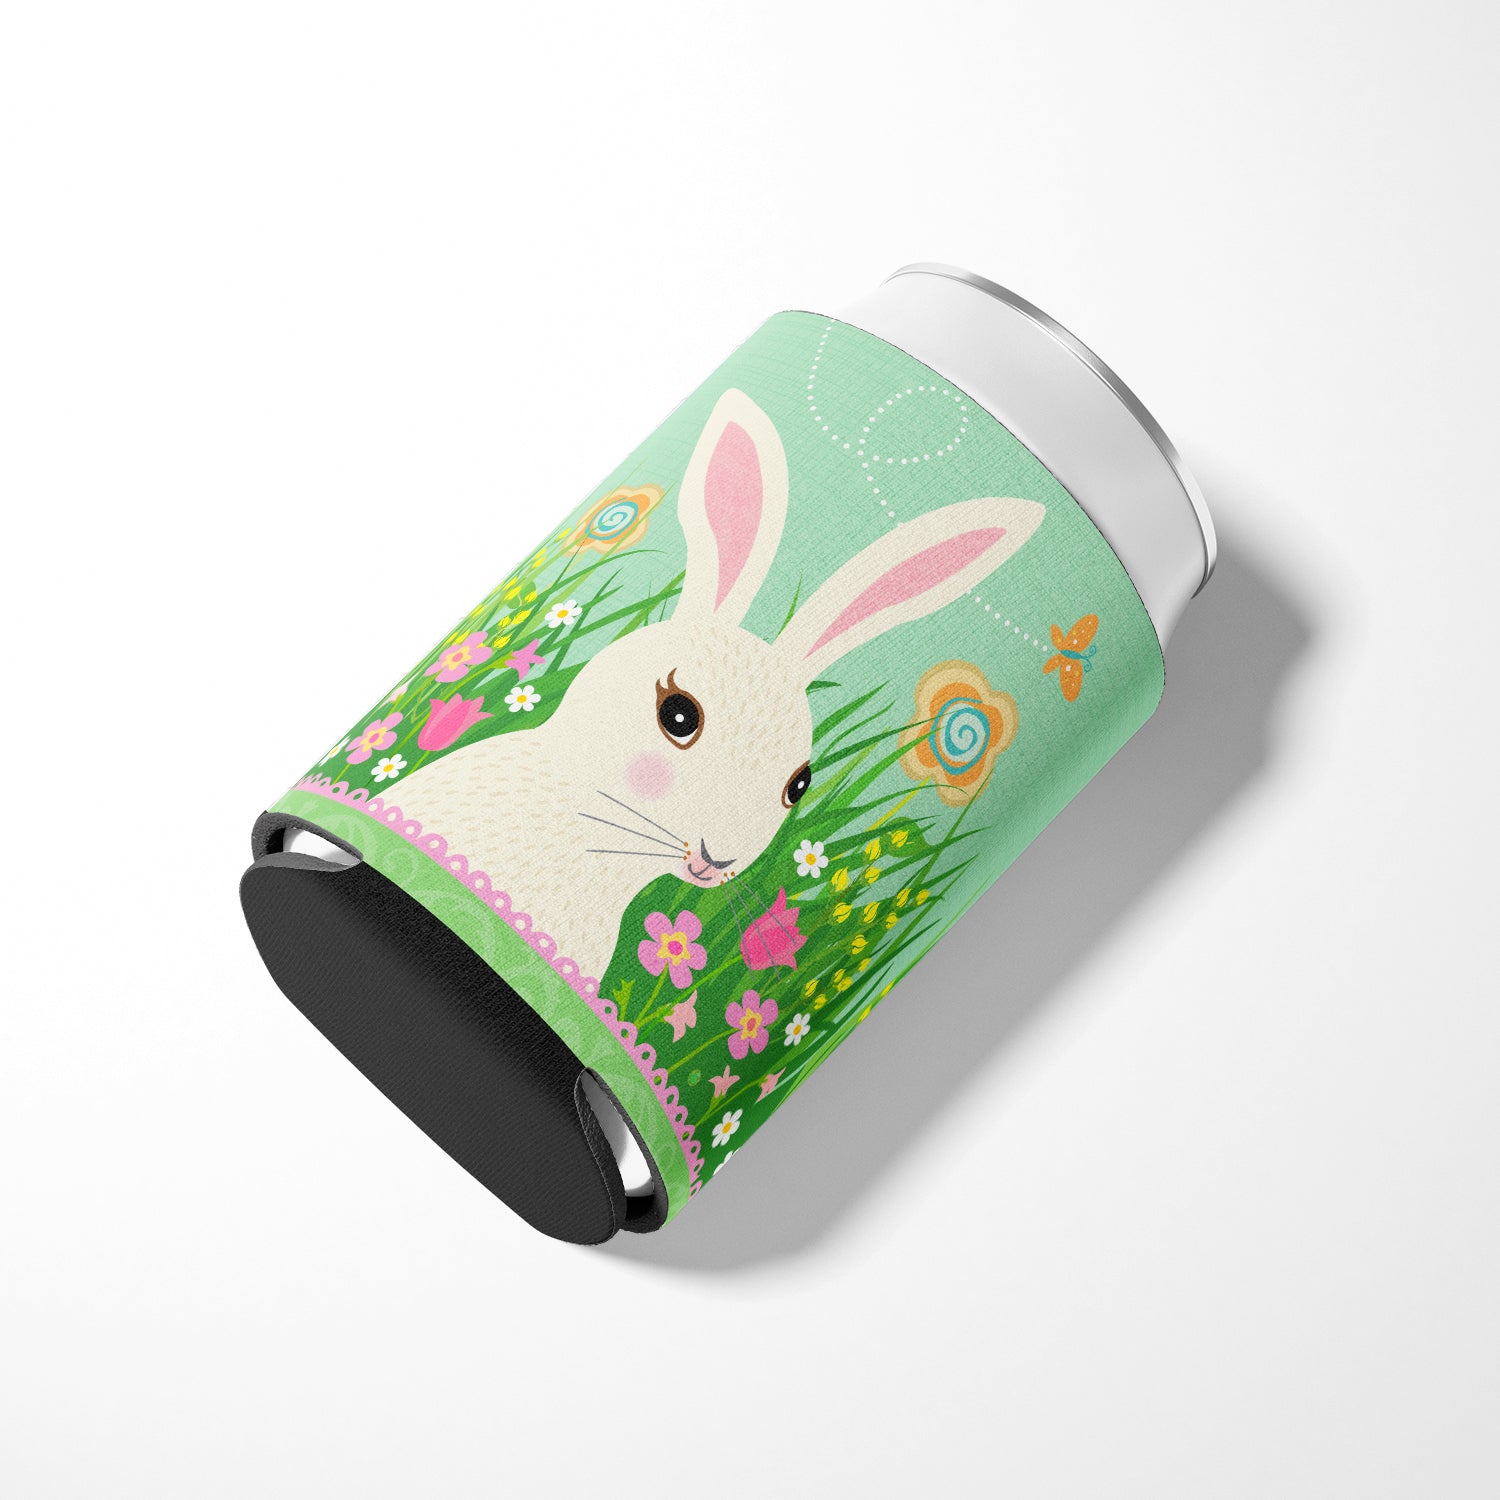 Easter Bunny Rabbit Can or Bottle Hugger VHA3023CC  the-store.com.